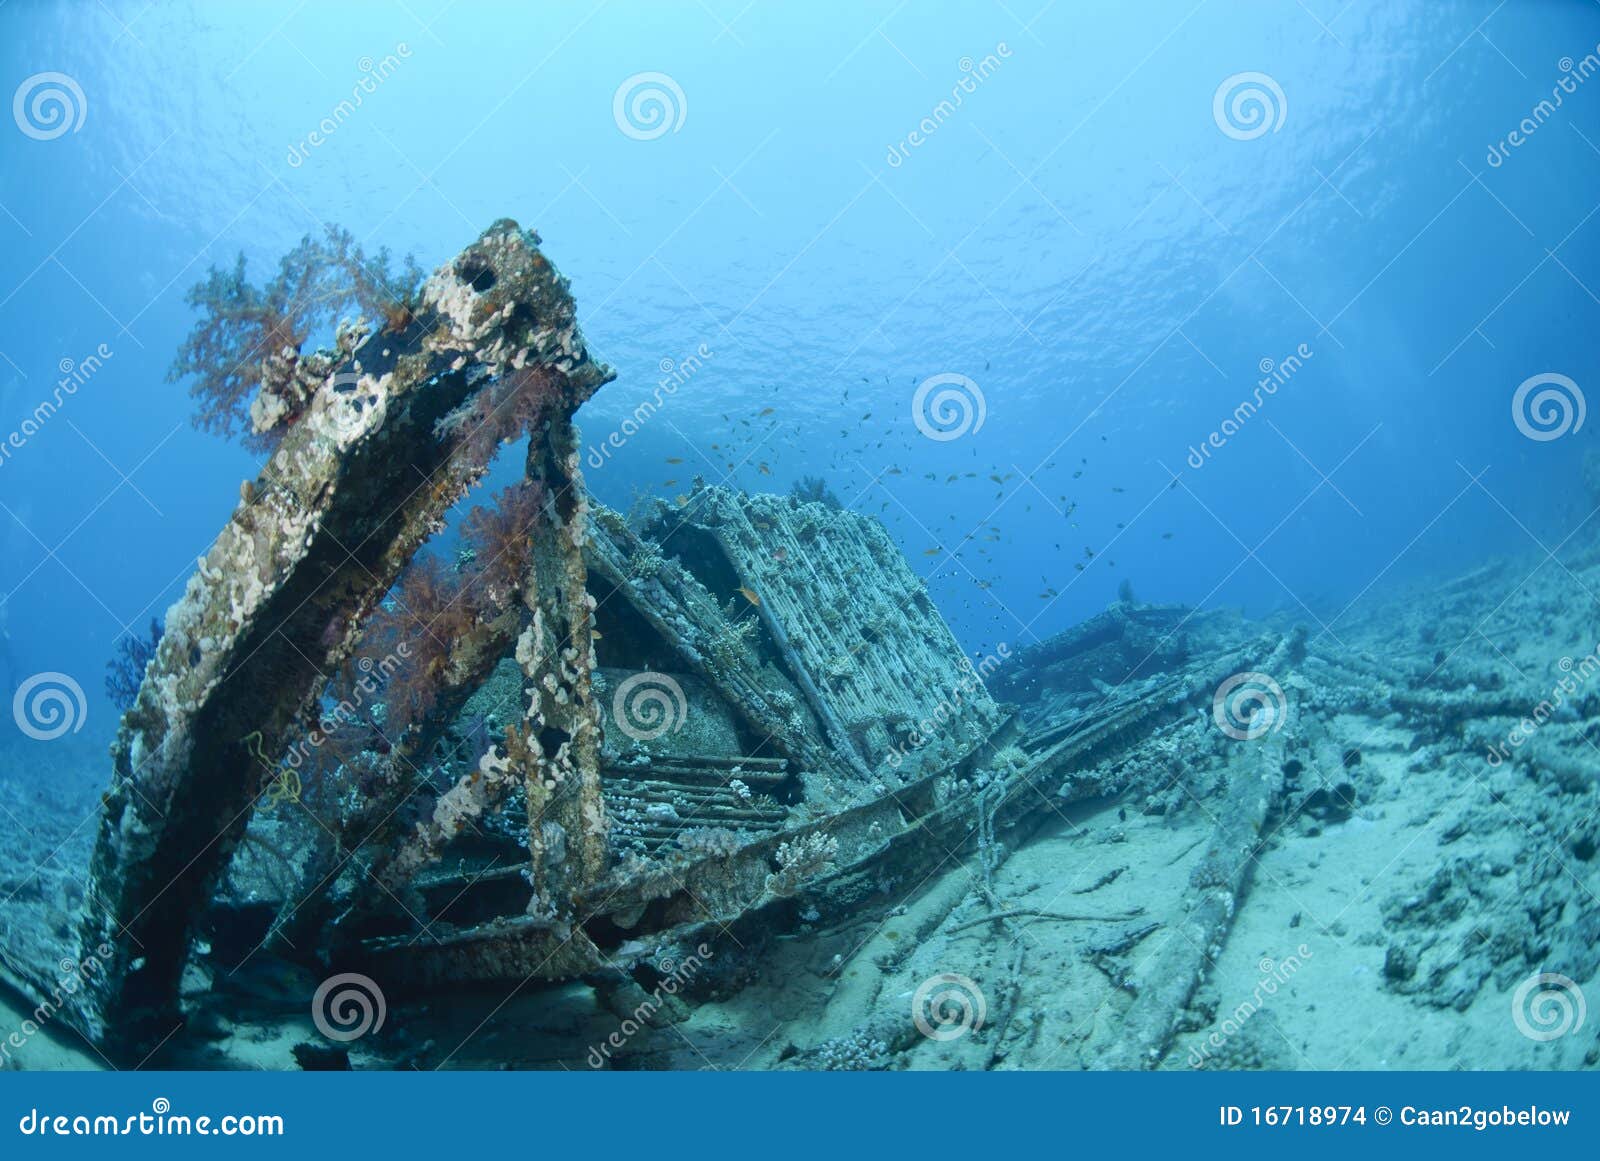 remains of the container cargo of a shipwreck.